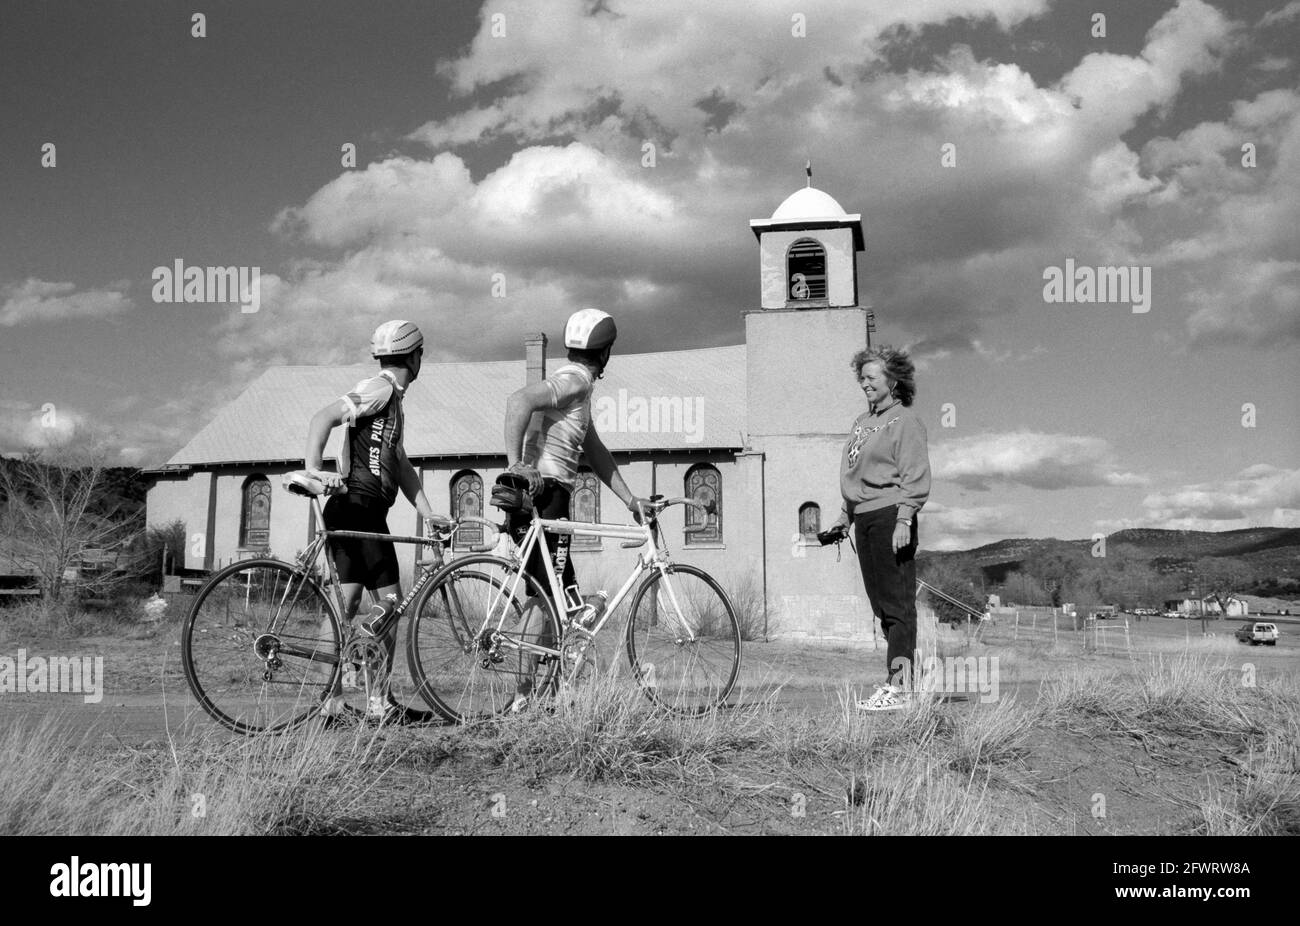 Bicyclists admire the historic Mission Chapel of Our Lady of Light, built in Lamy New Mexico in 1926. The chapel was abandoned in 1994 because of no priest or parishoners. Circa 1977. Stock Photo